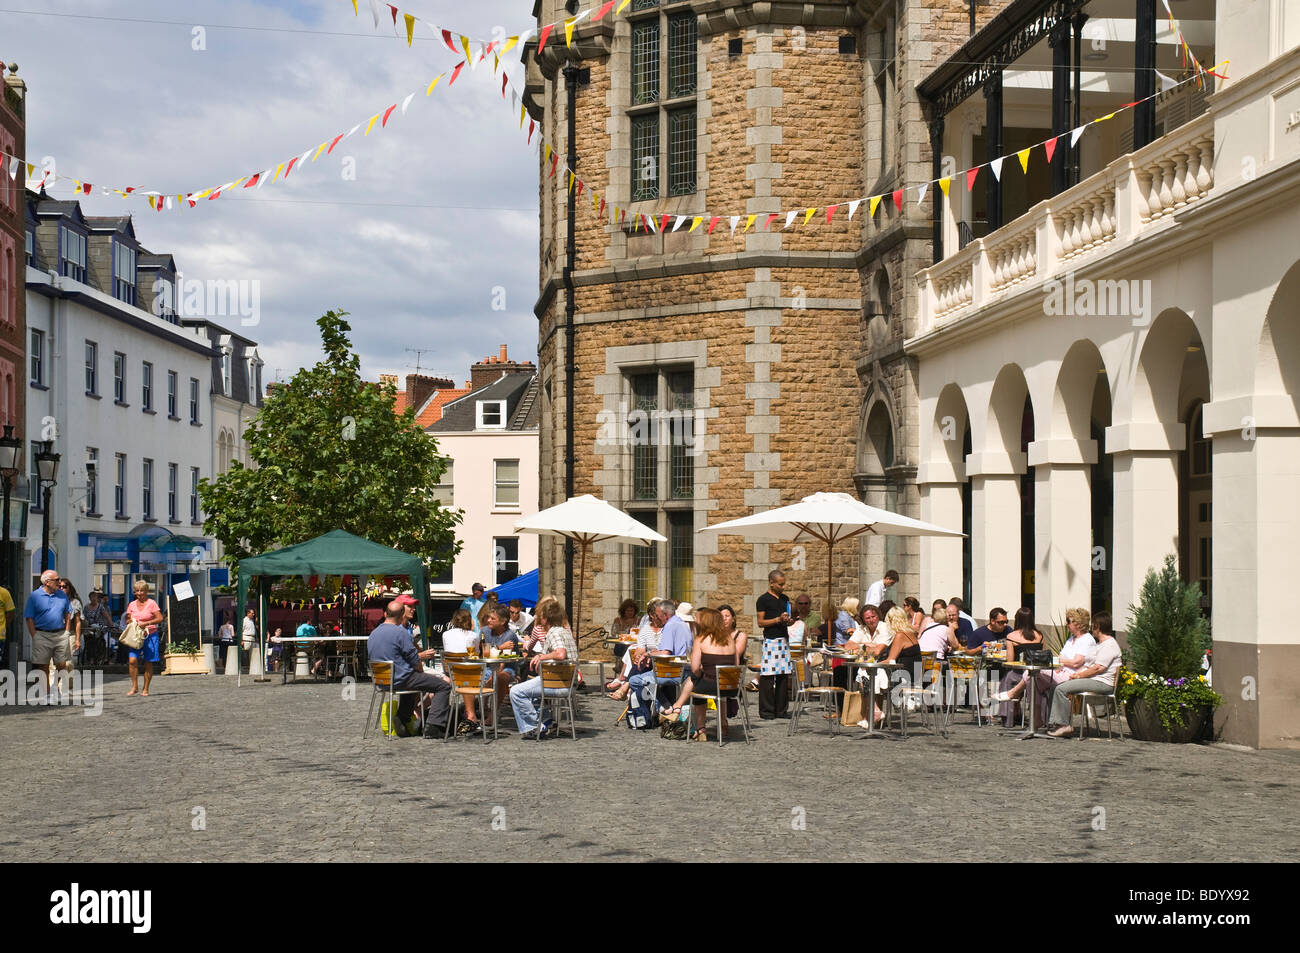 dh The Market Buildings ST PETER PORT GUERNSEY Dining out Les Arcades The Market Buildings Market Square plaza people cafe Stock Photo